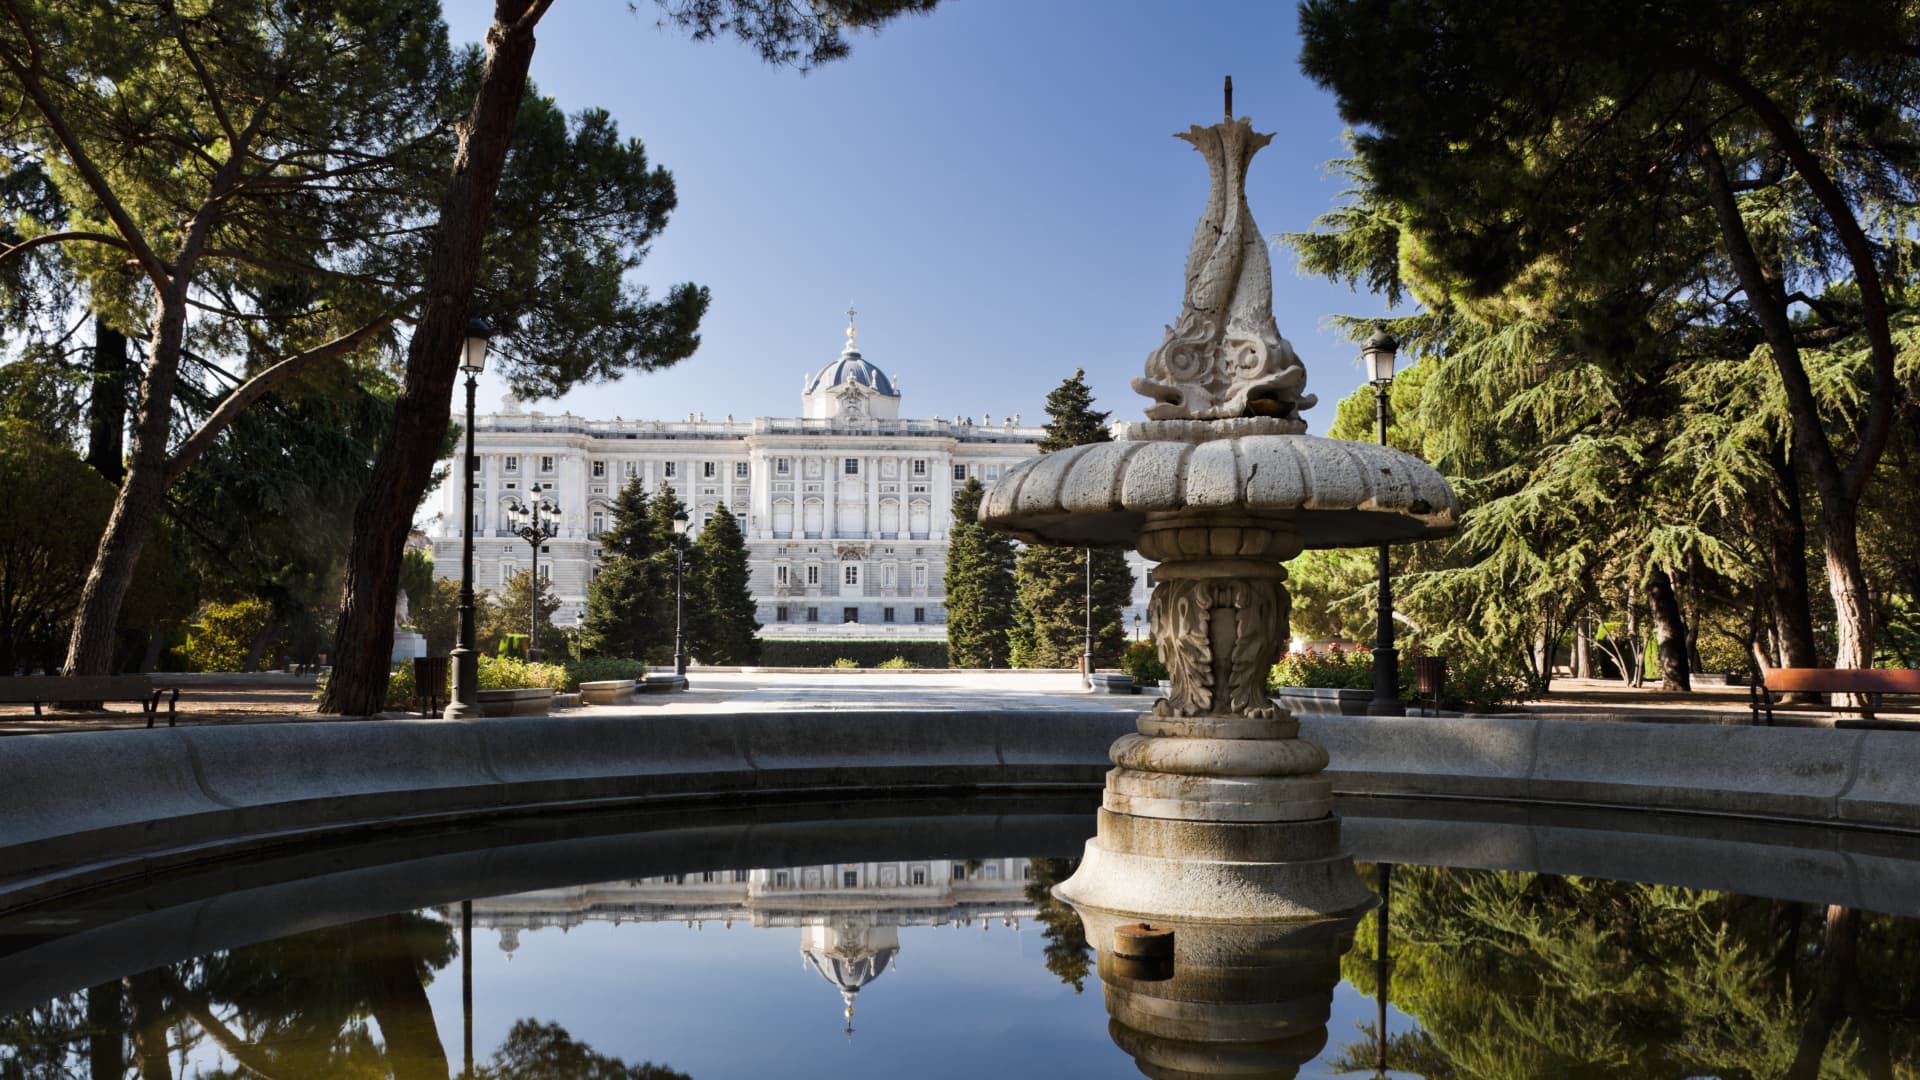 The Palacio Real (Royal Palace) seen in the background in Madrid.